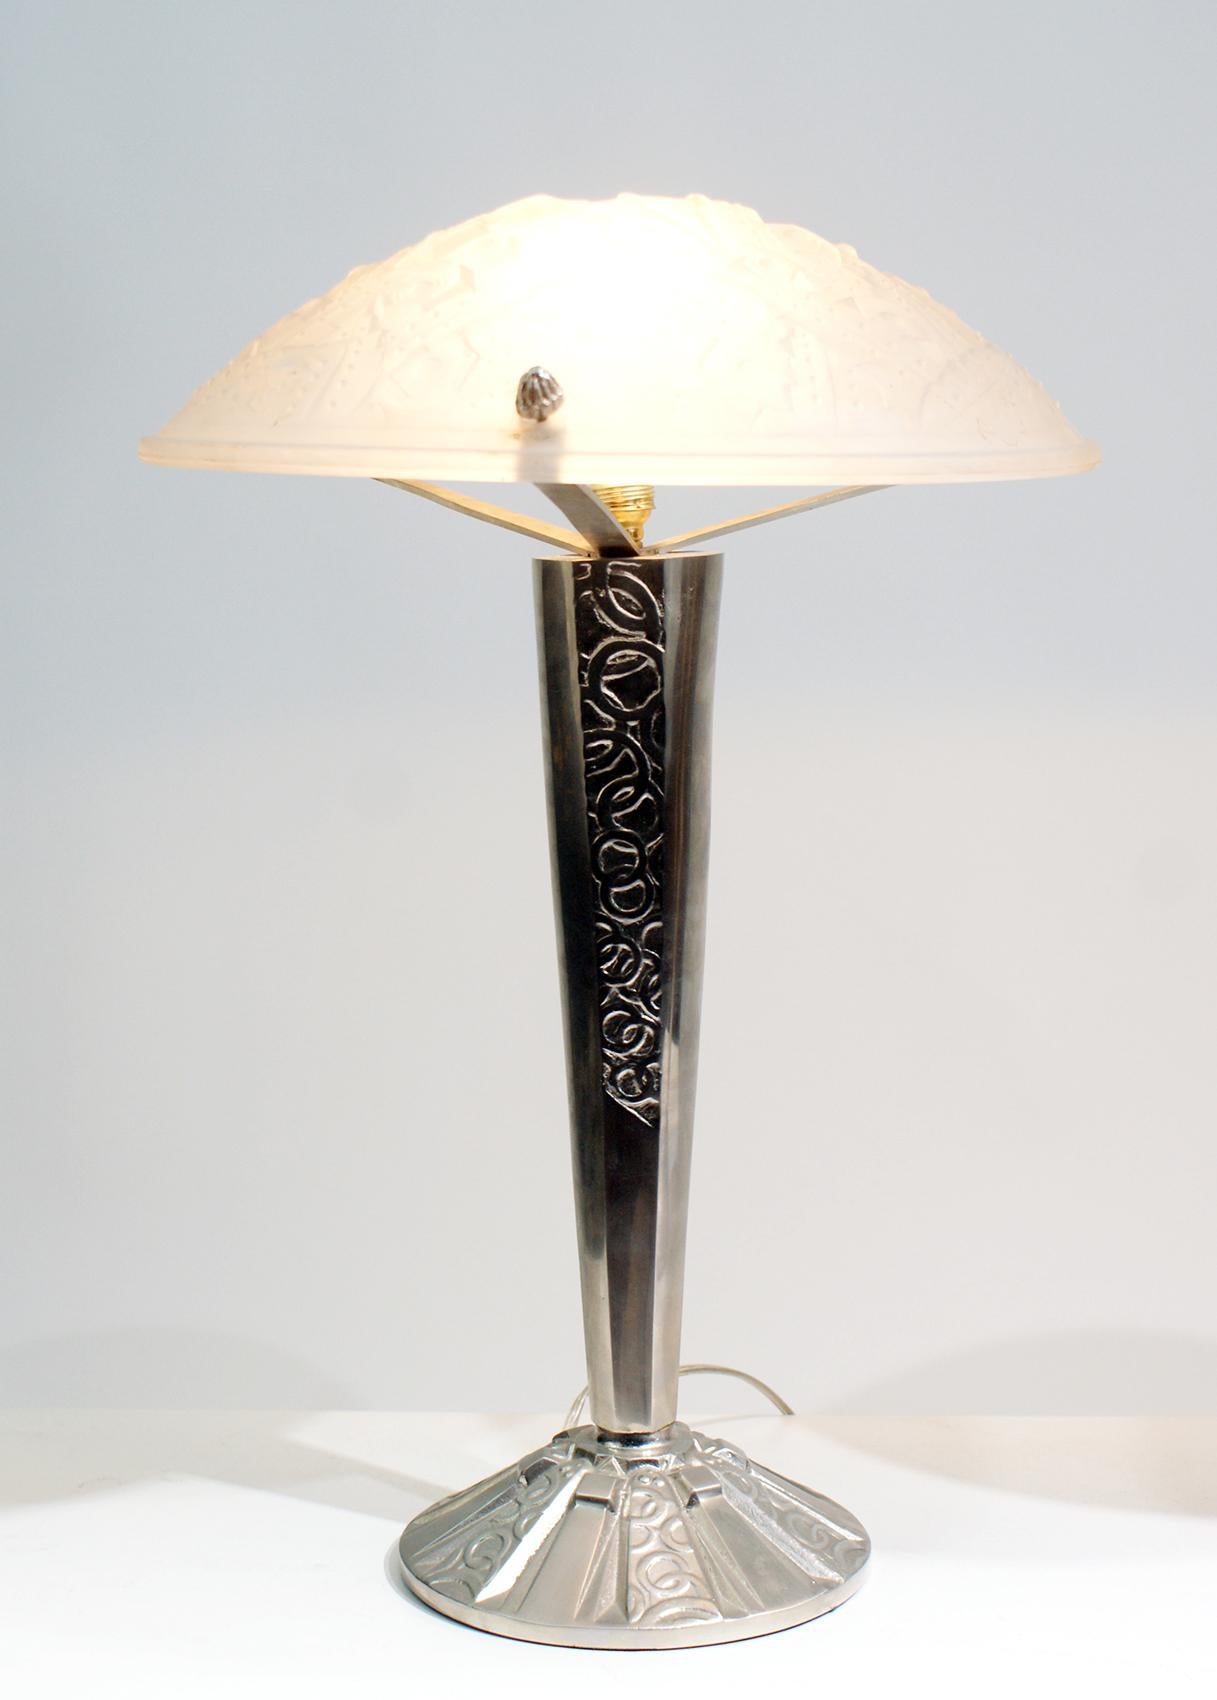 Beautiful pair of Art Deco table lamp, high quality molded glass panel with fruits and leaves motif design in relief included “Muller Frères Luneville” signature on the glass, supported by nickeled bronze metal column with circles motif